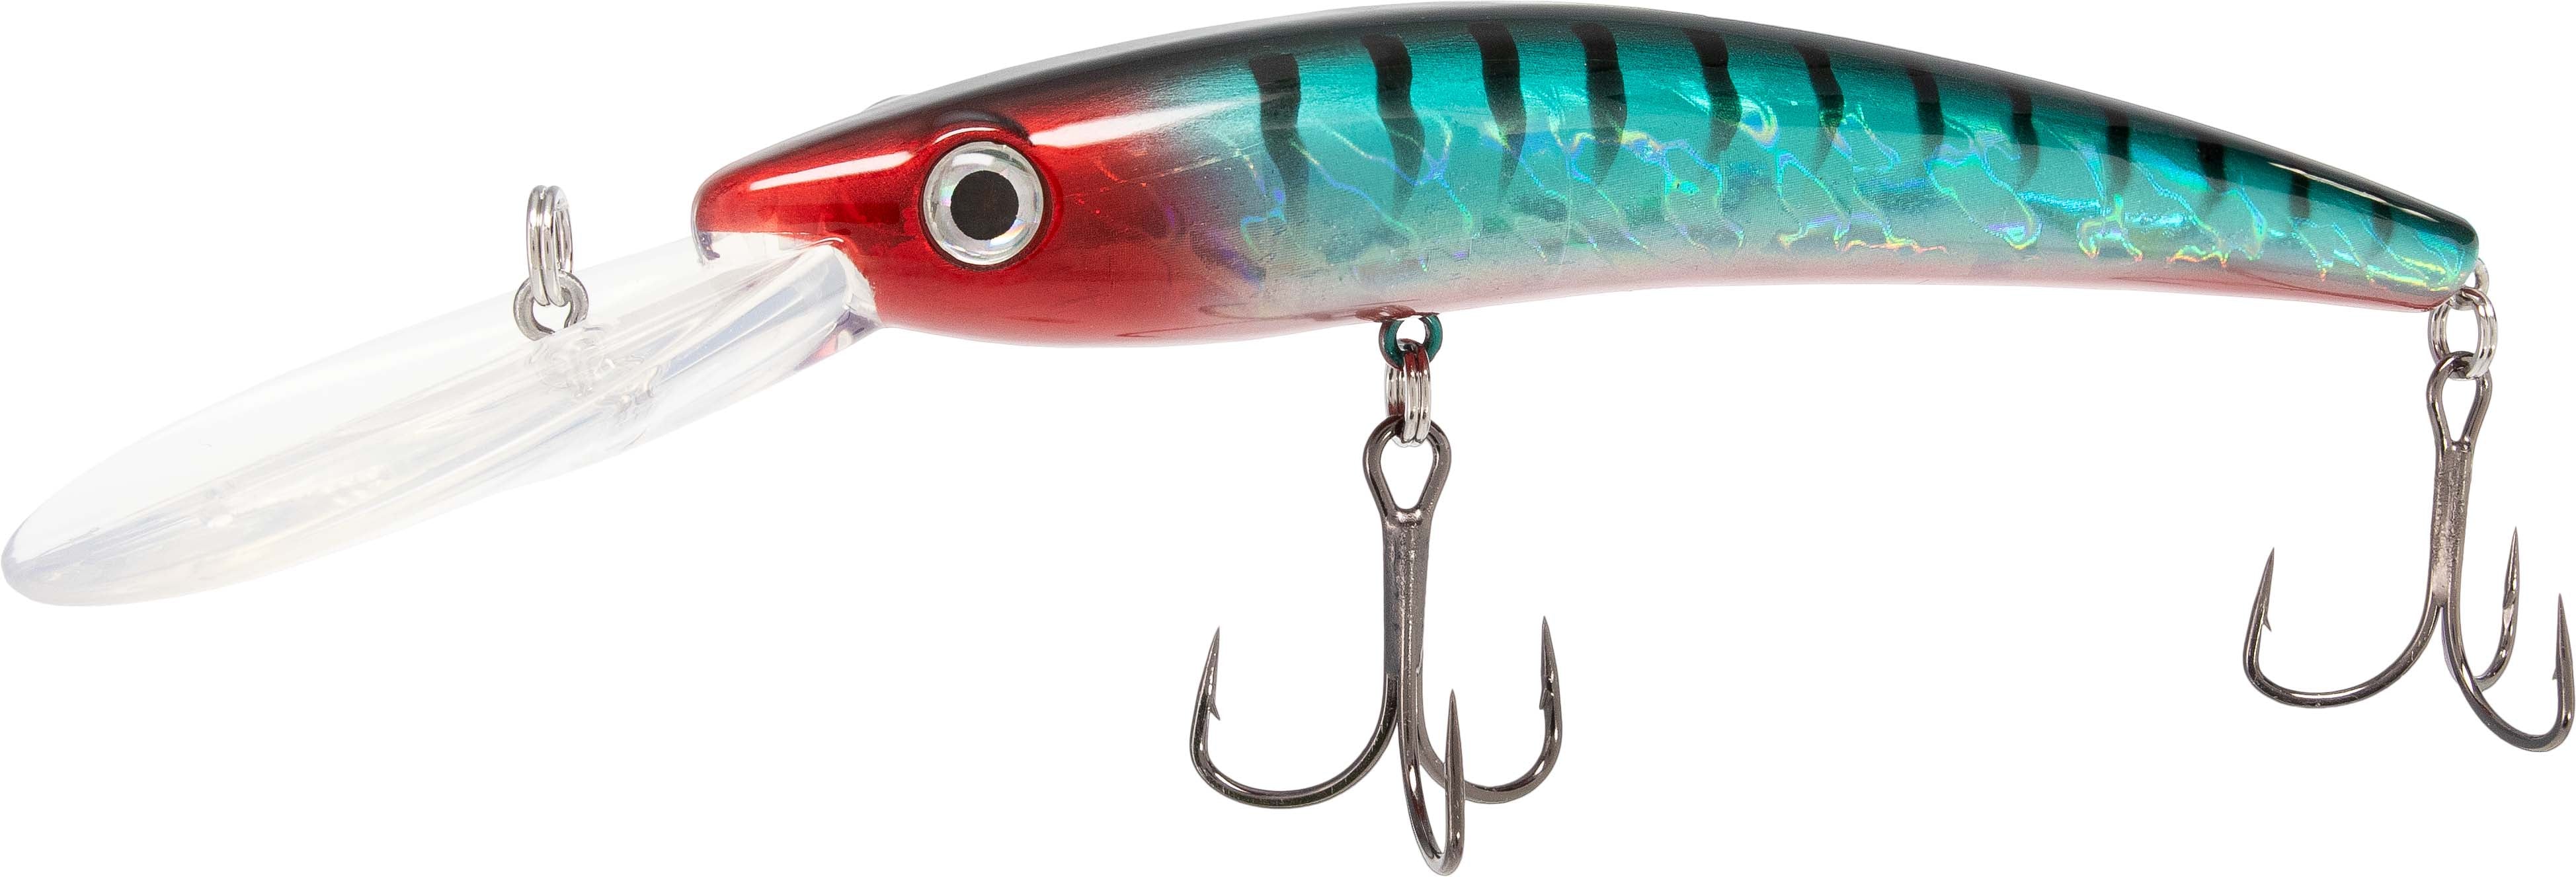 About CPF Lures - Professional Fishing Lure Company